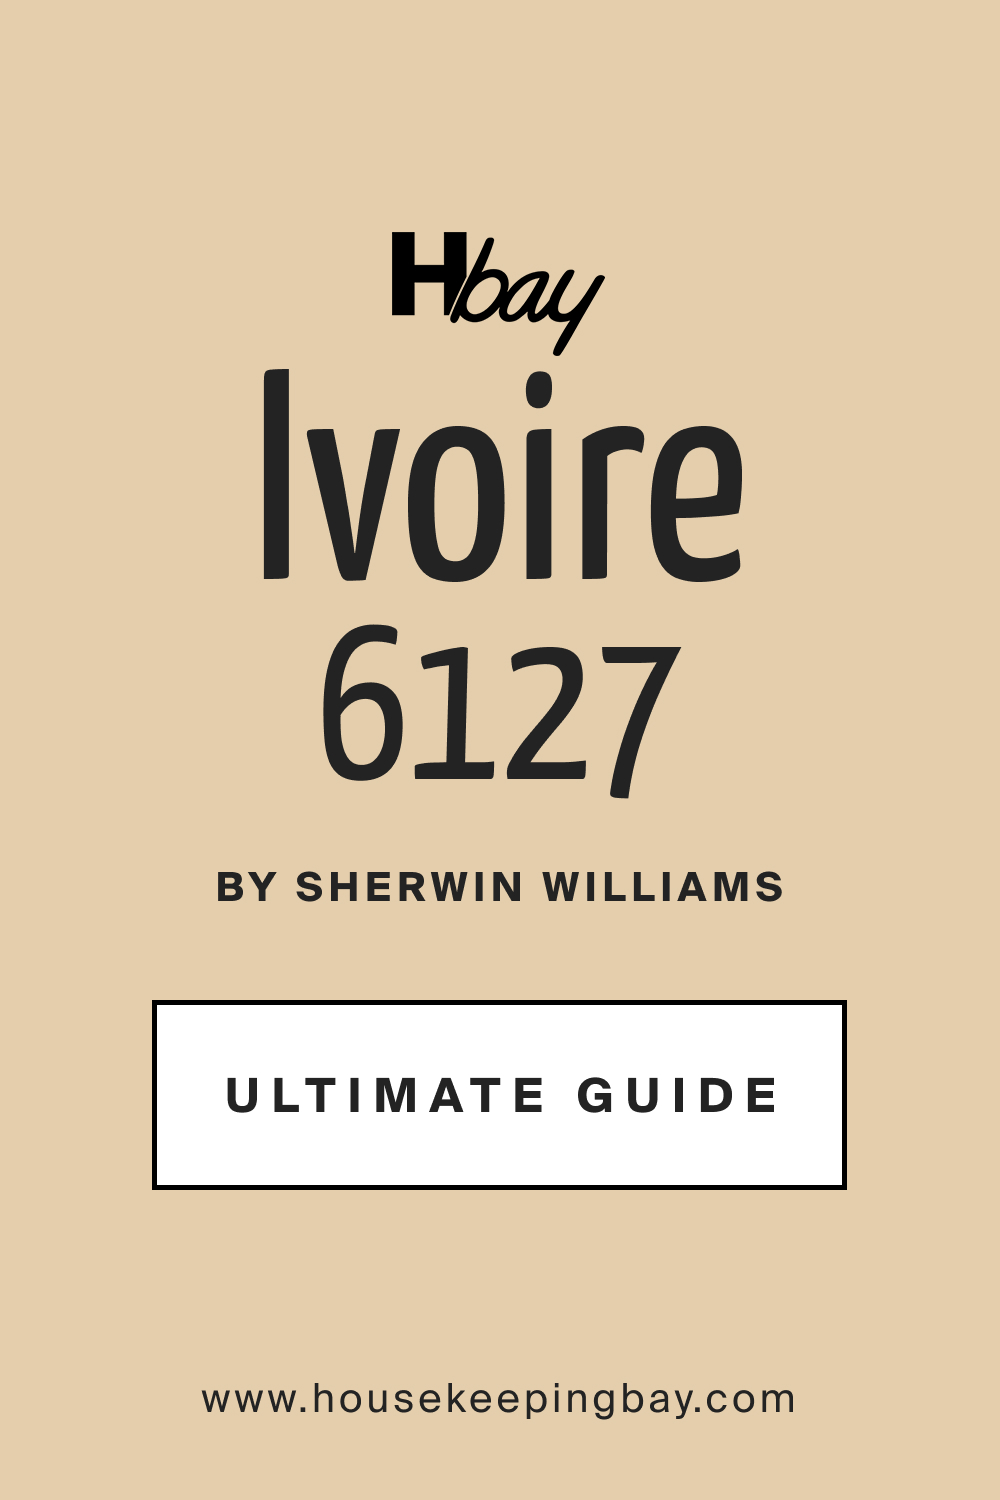 SW 6127 Ivoire by Sherwin Williams Ultimate Guide